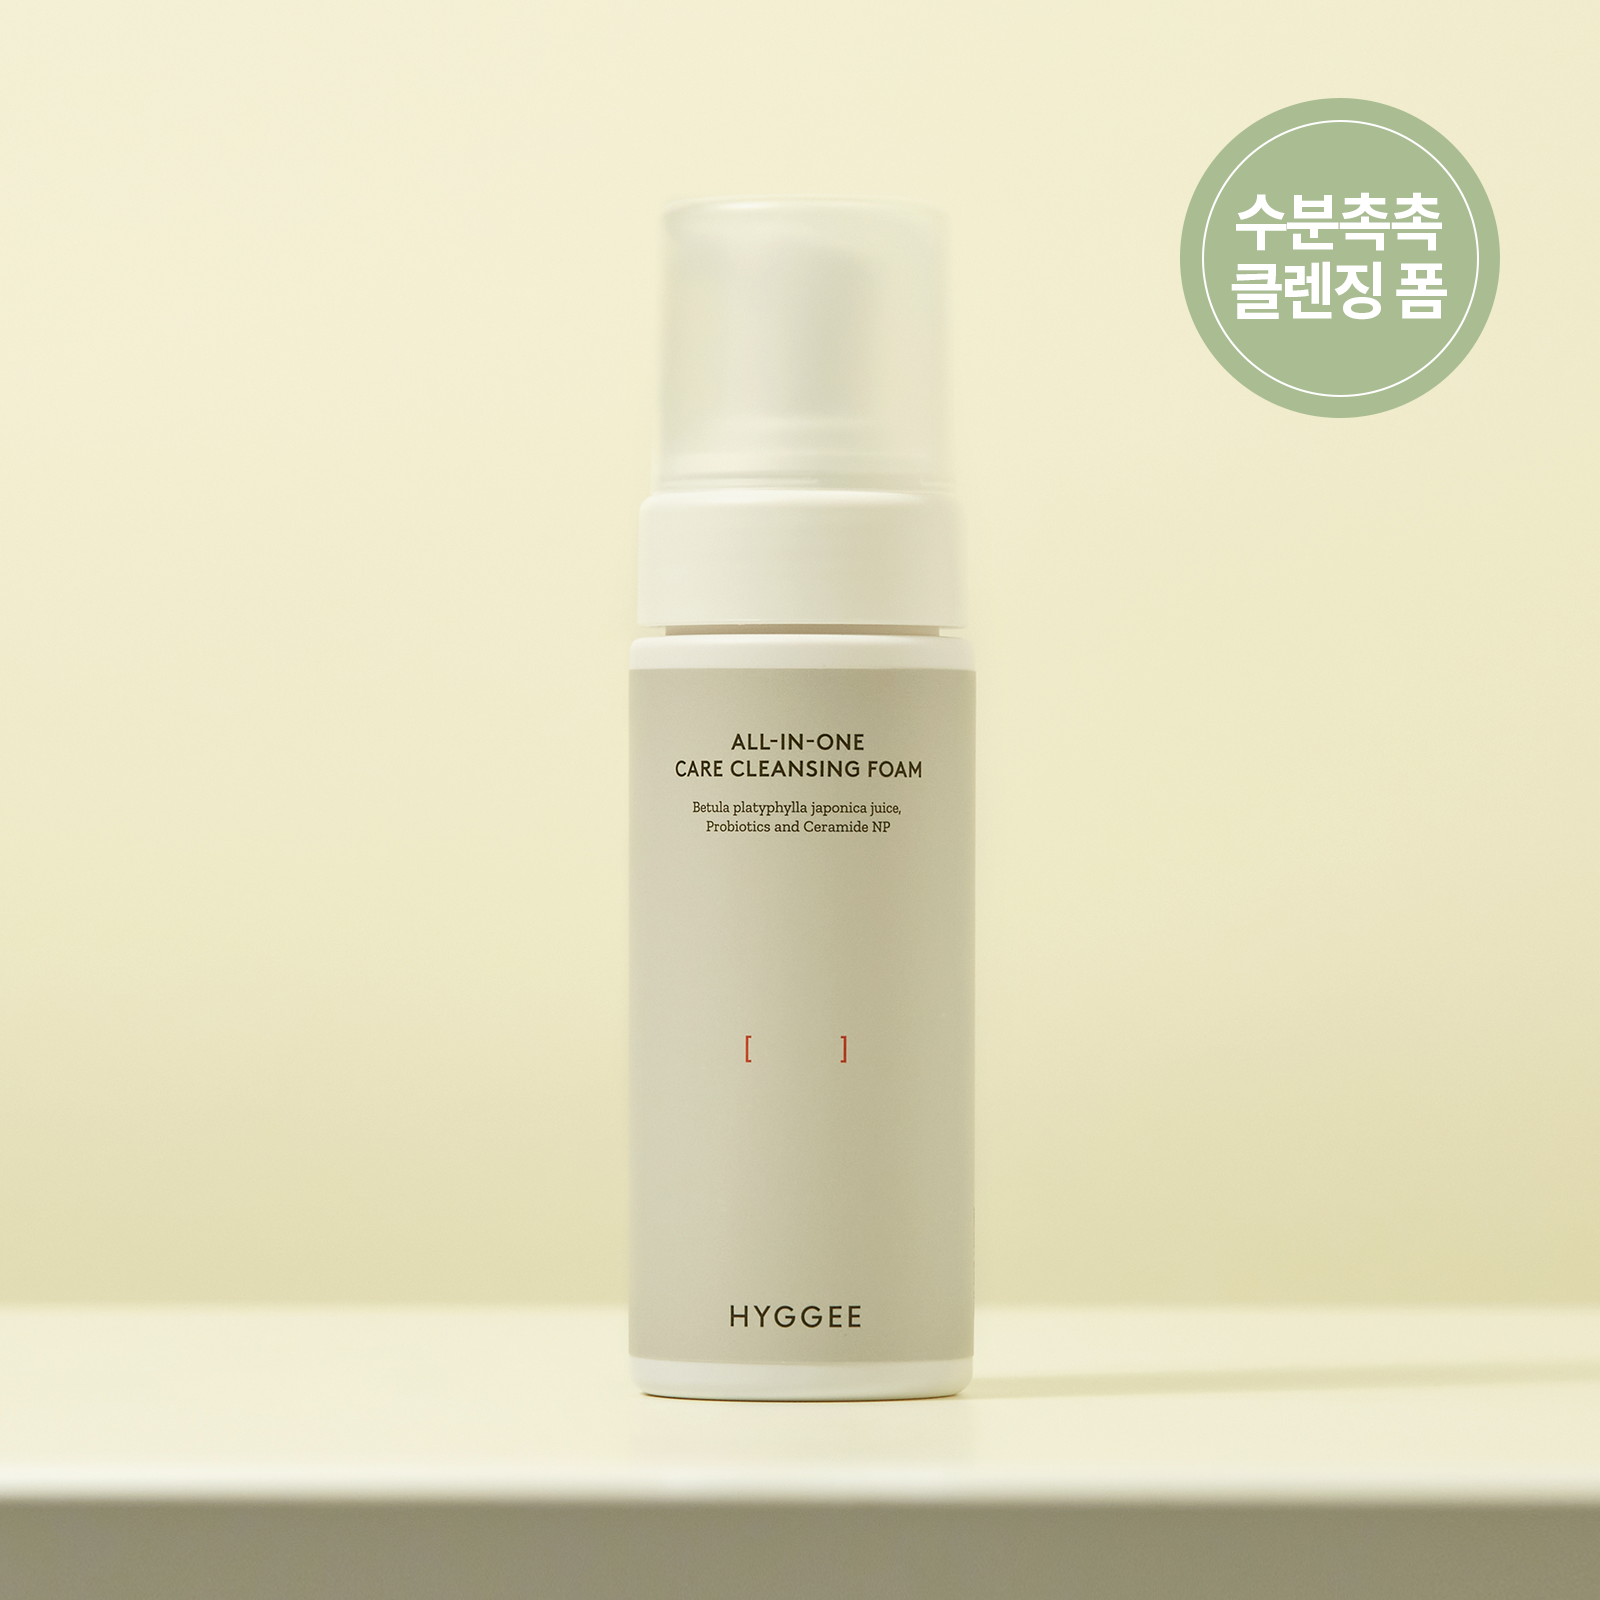 HYGGEE All-In-One Care Cleansing Foam 150ml on sales on our Website !